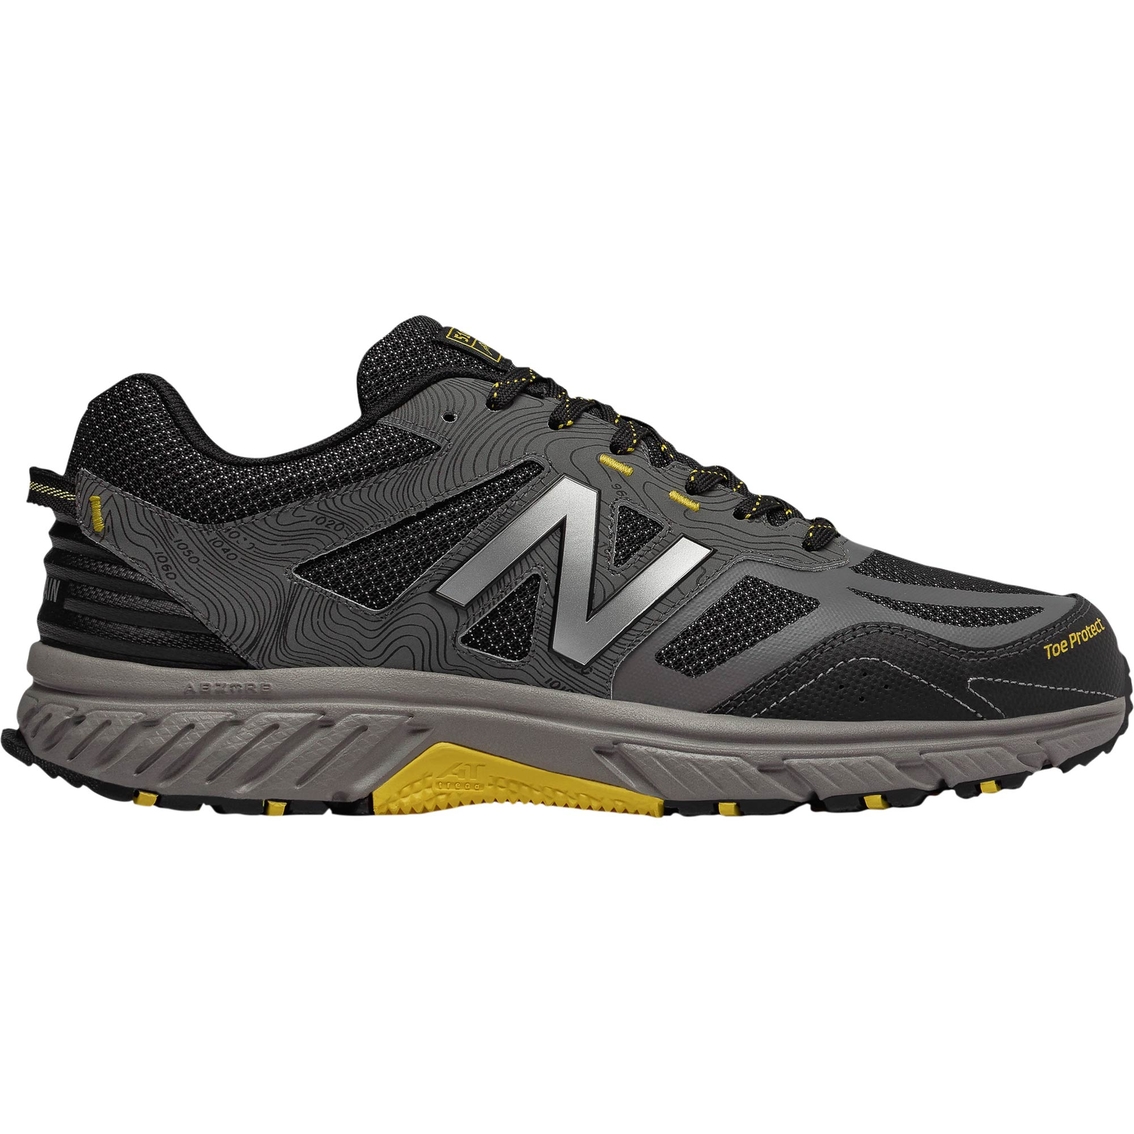 New Balance Men's Mt510lc4 Trail Running Shoes | Hiking & Trail | Shoes ...